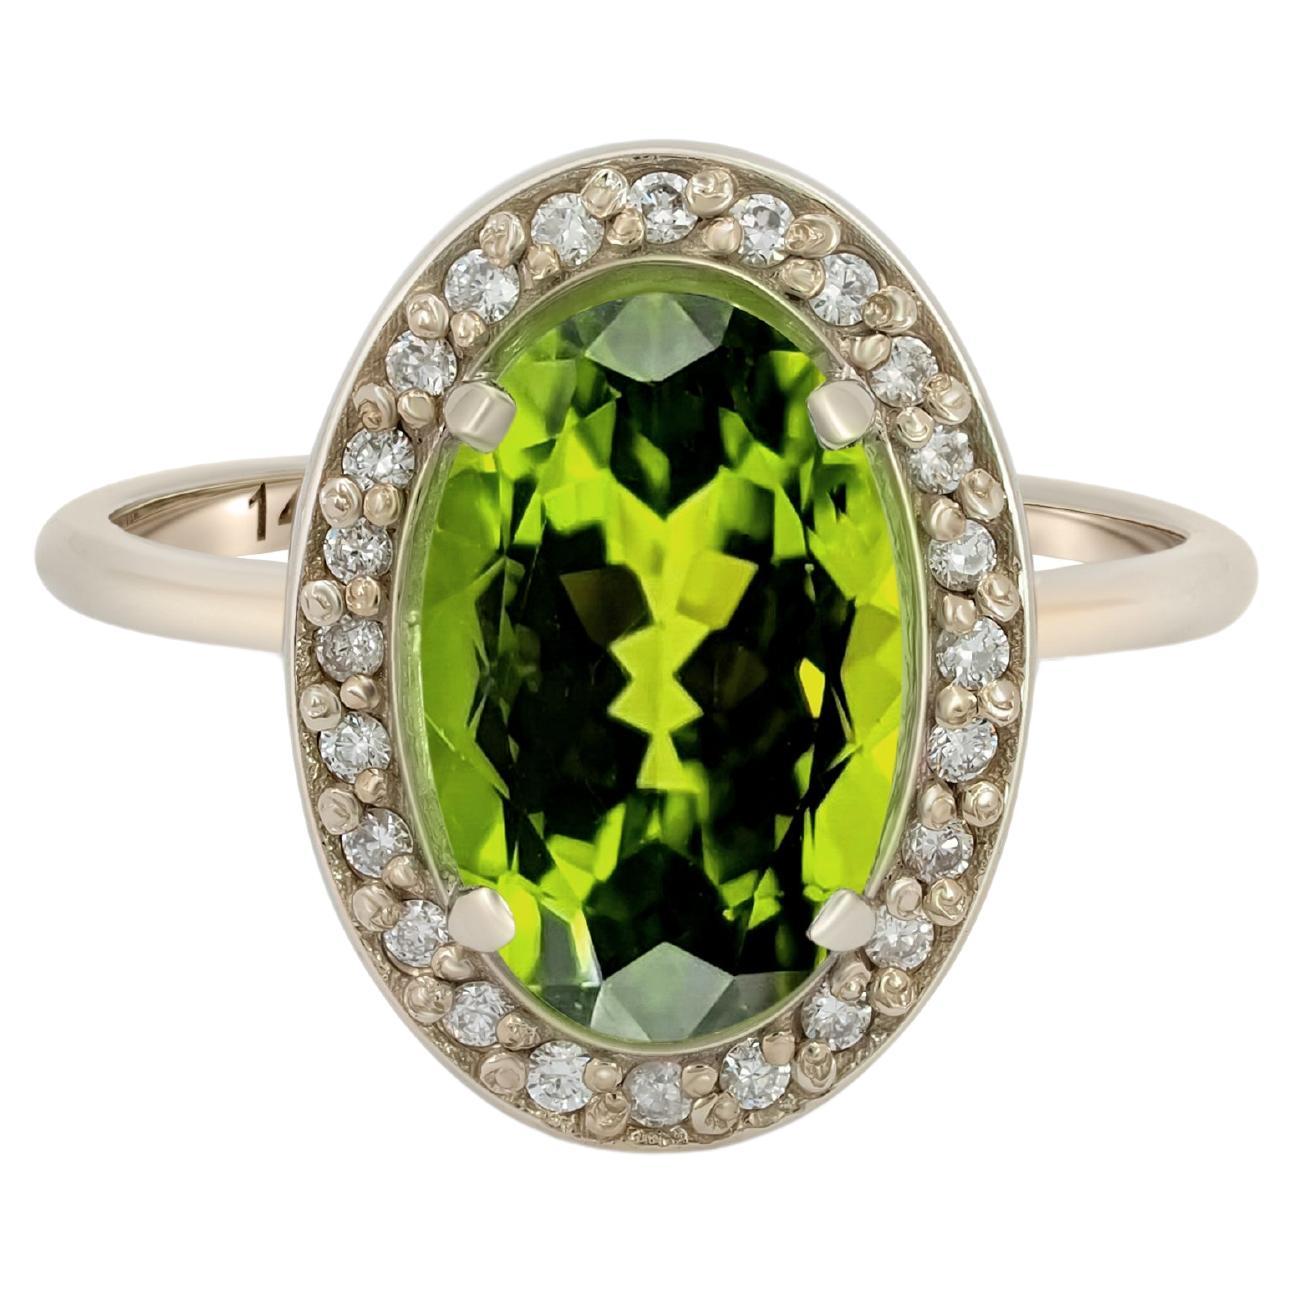 For Sale:  Peridot and diamonds 14k gold ring.